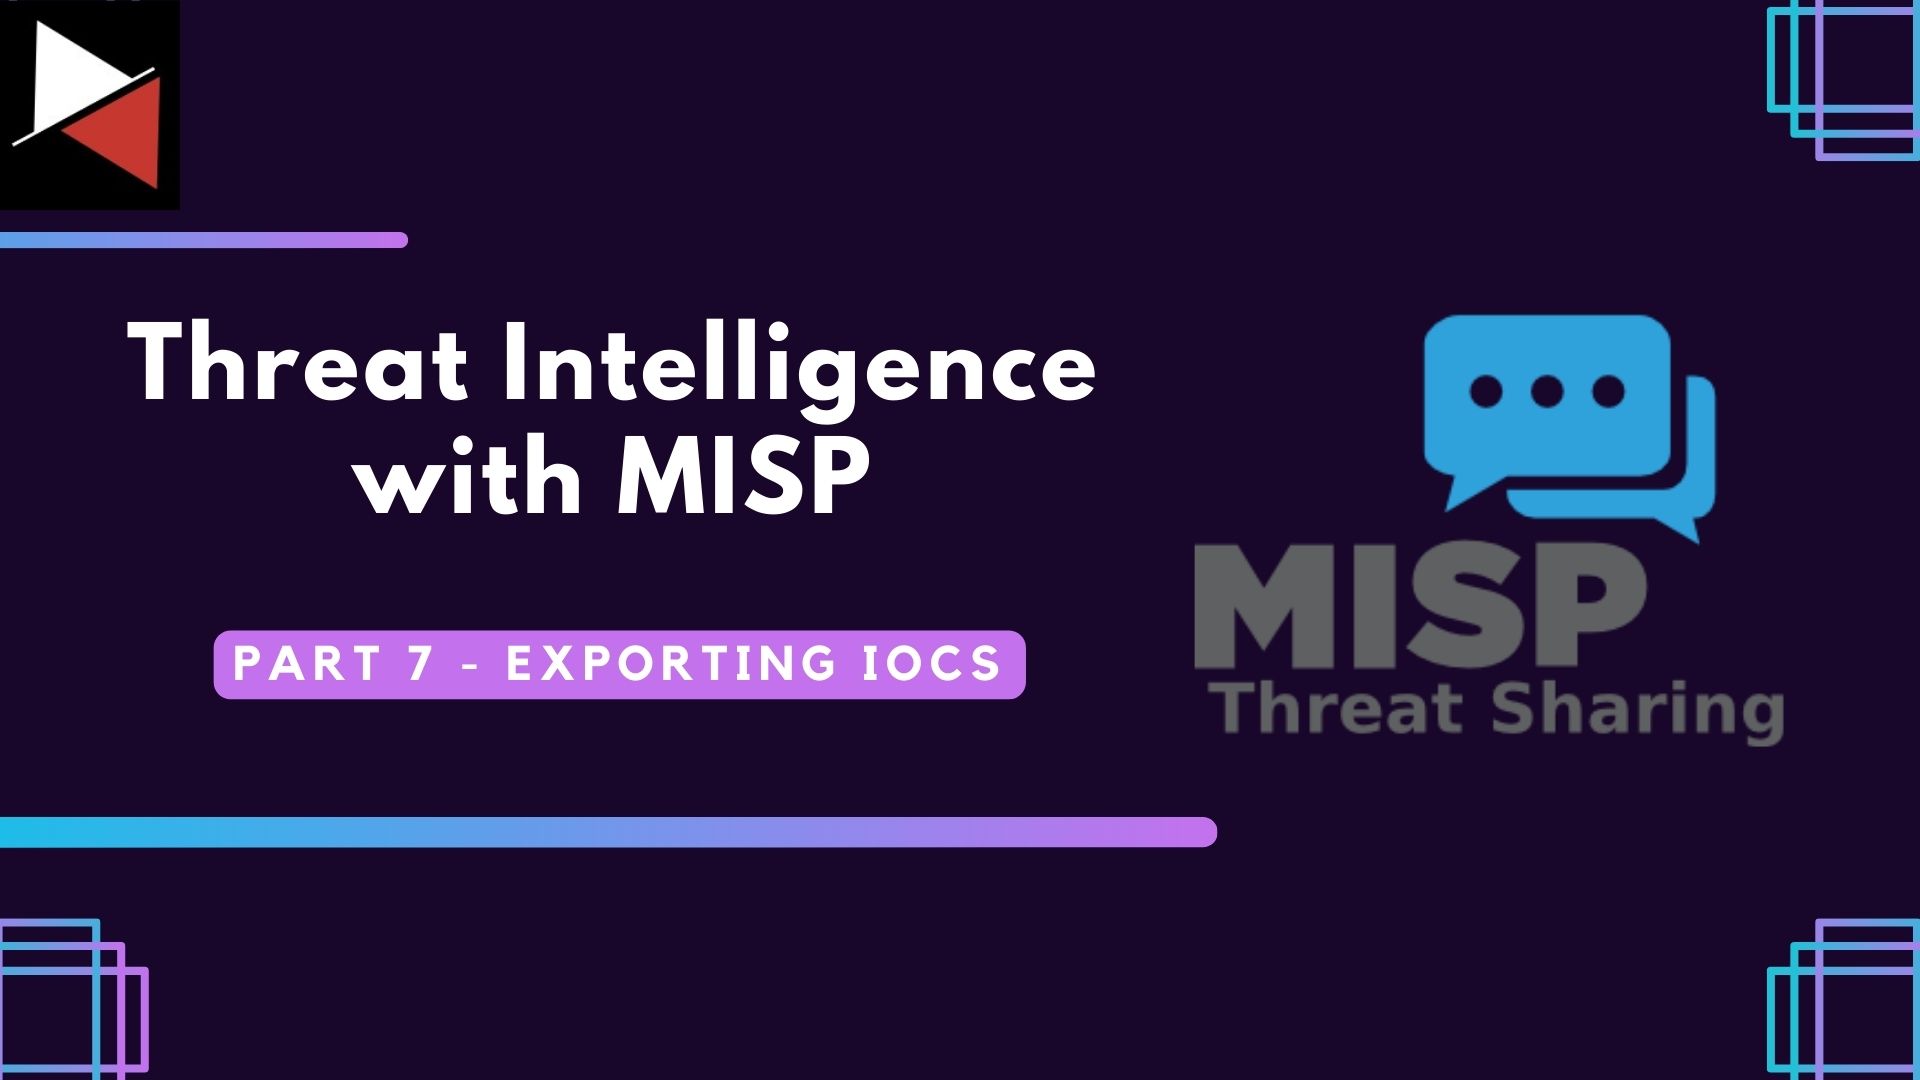 Threat Intelligence with MISP Part 7 - Exporting IOCs